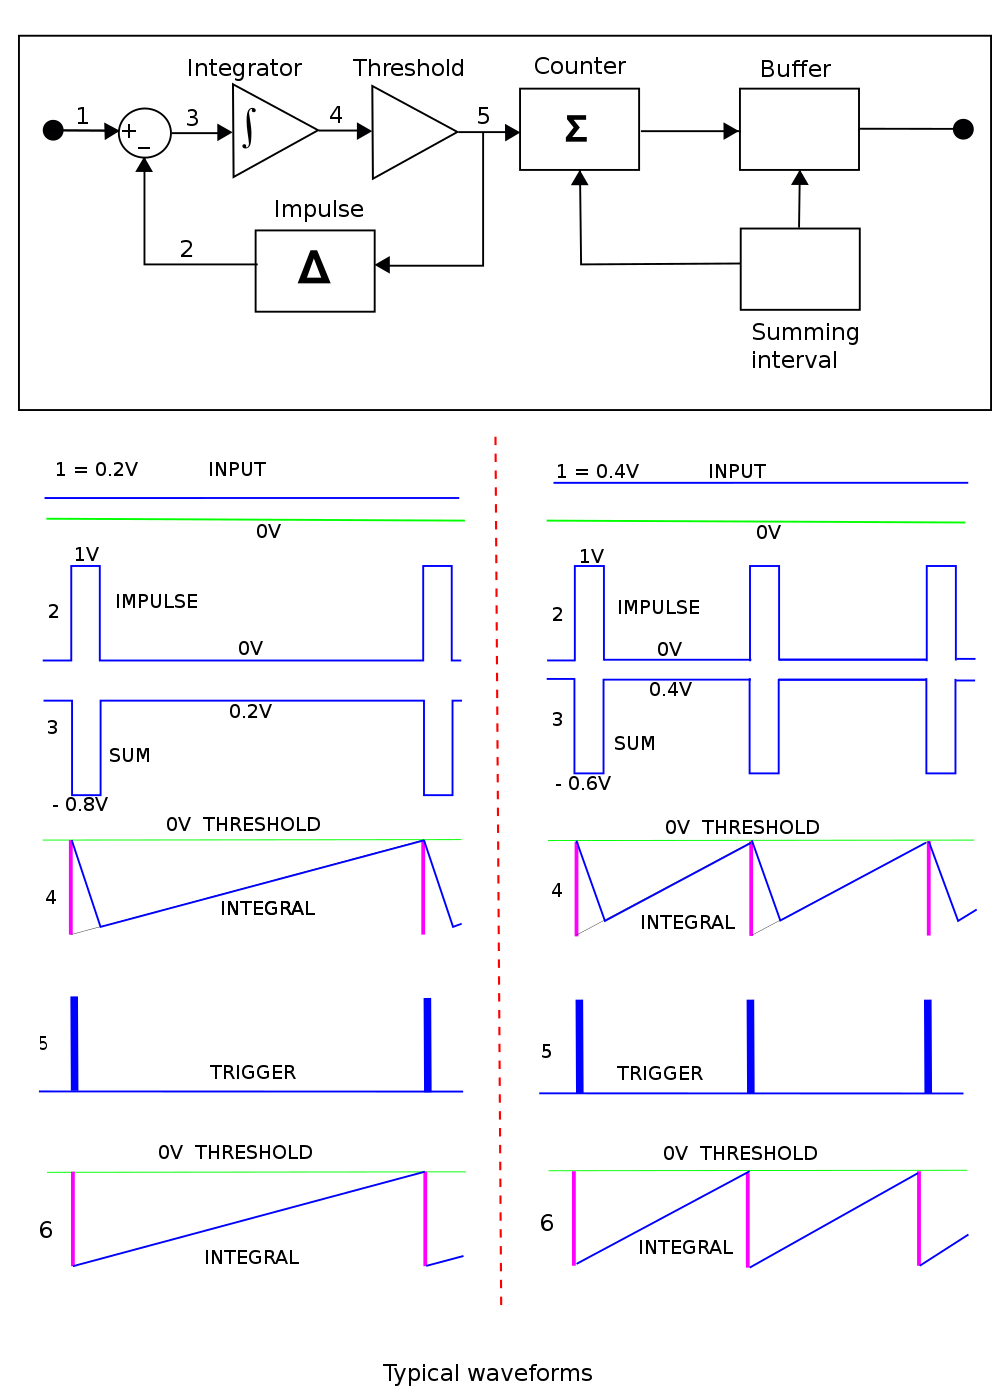 Figure 1: Block diagram and waveforms for an unclocked voltage-to-frequency converter (left part) with frequency counting (right part) makes a complete A-to-D converter.  Constraining the impulses to occur at regularly spaced clock intervals would convert this system into a sigma-delta ADC.